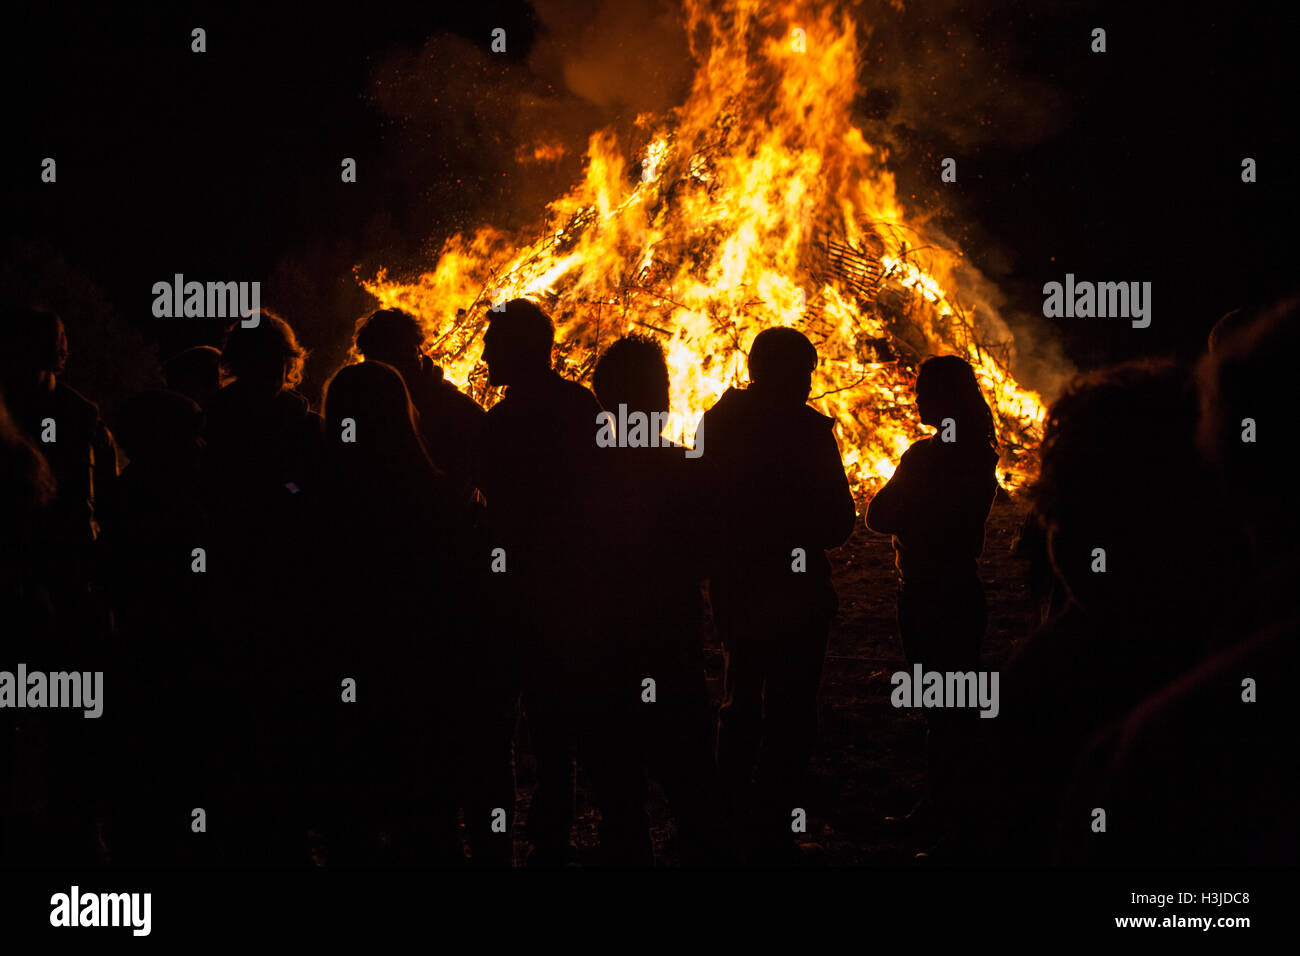 Bonfire Night, believed to be Europe's largest bonfire at Guy Fawkes Night, at Ottery St Mary Tar Barrel Rolling event,Devon,England, UK Stock Photo